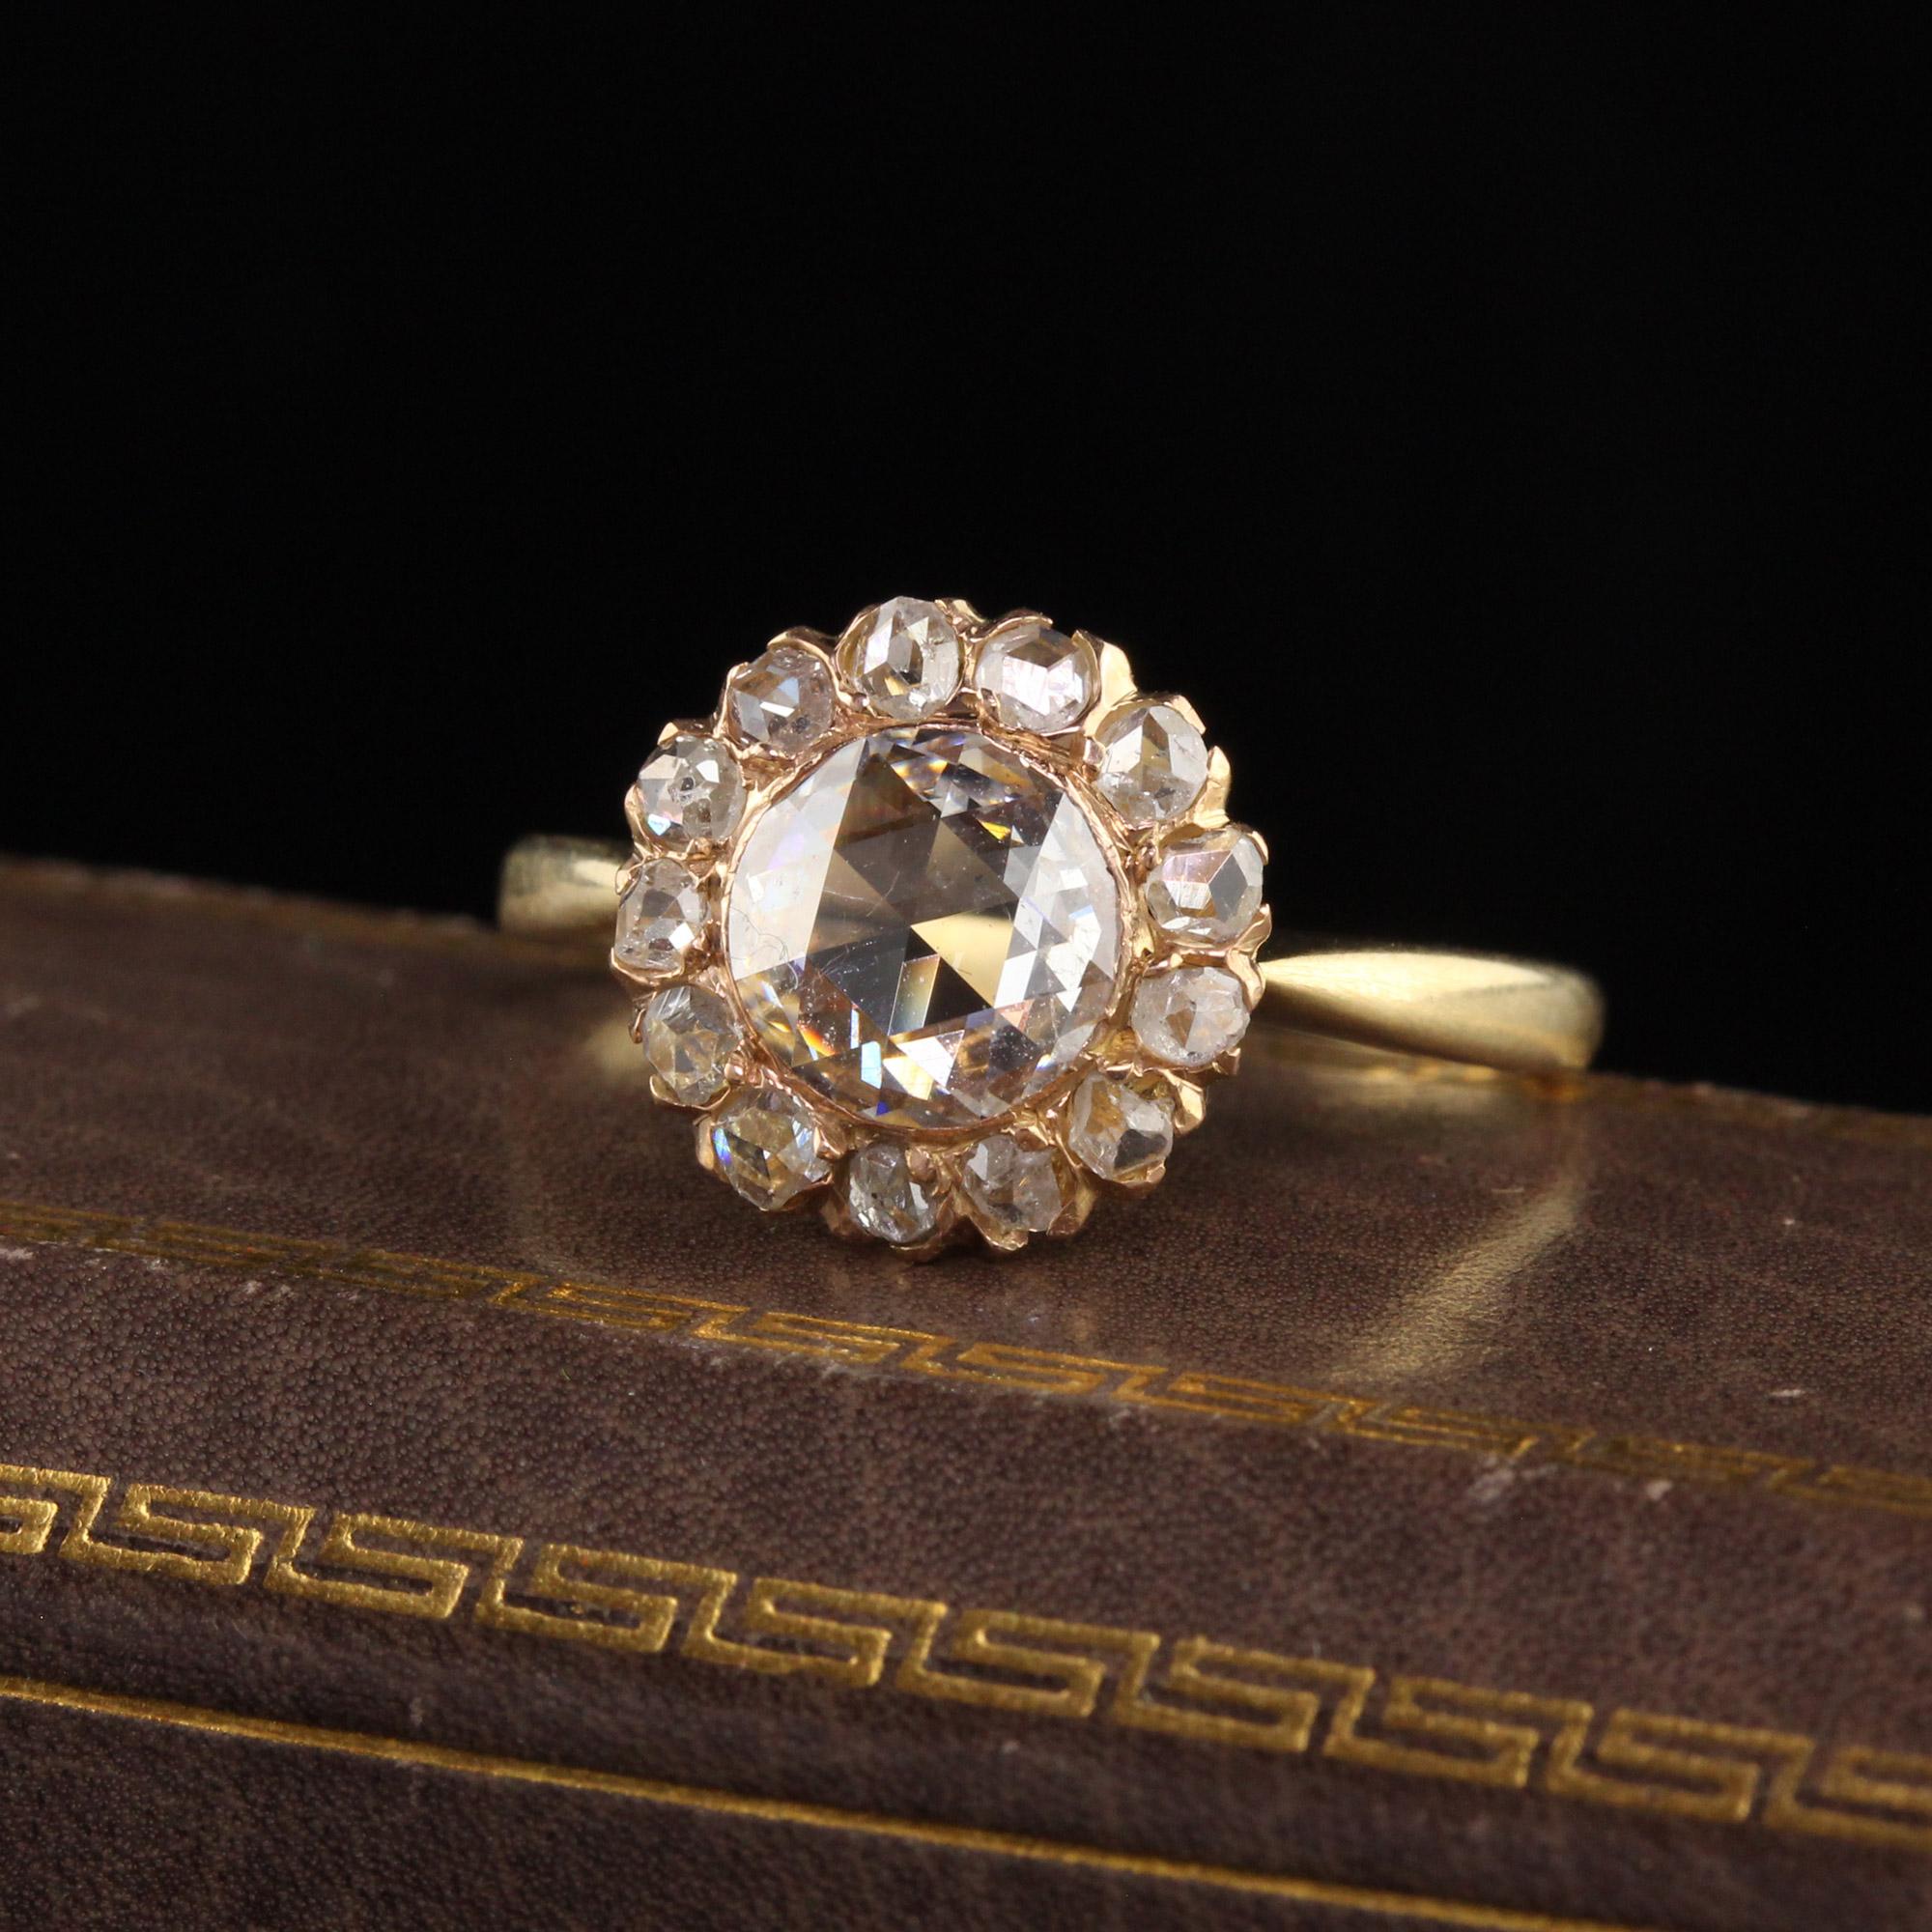 Beautiful Antique Victorian 18K Yellow Gold Rose Cut Diamond Engagement Ring. This incredible engagement ring is crafted in 18K yellow gold and has a GIA certified domed rose cut in the center of a gorgeous victorian mounting surrounded by rose cut